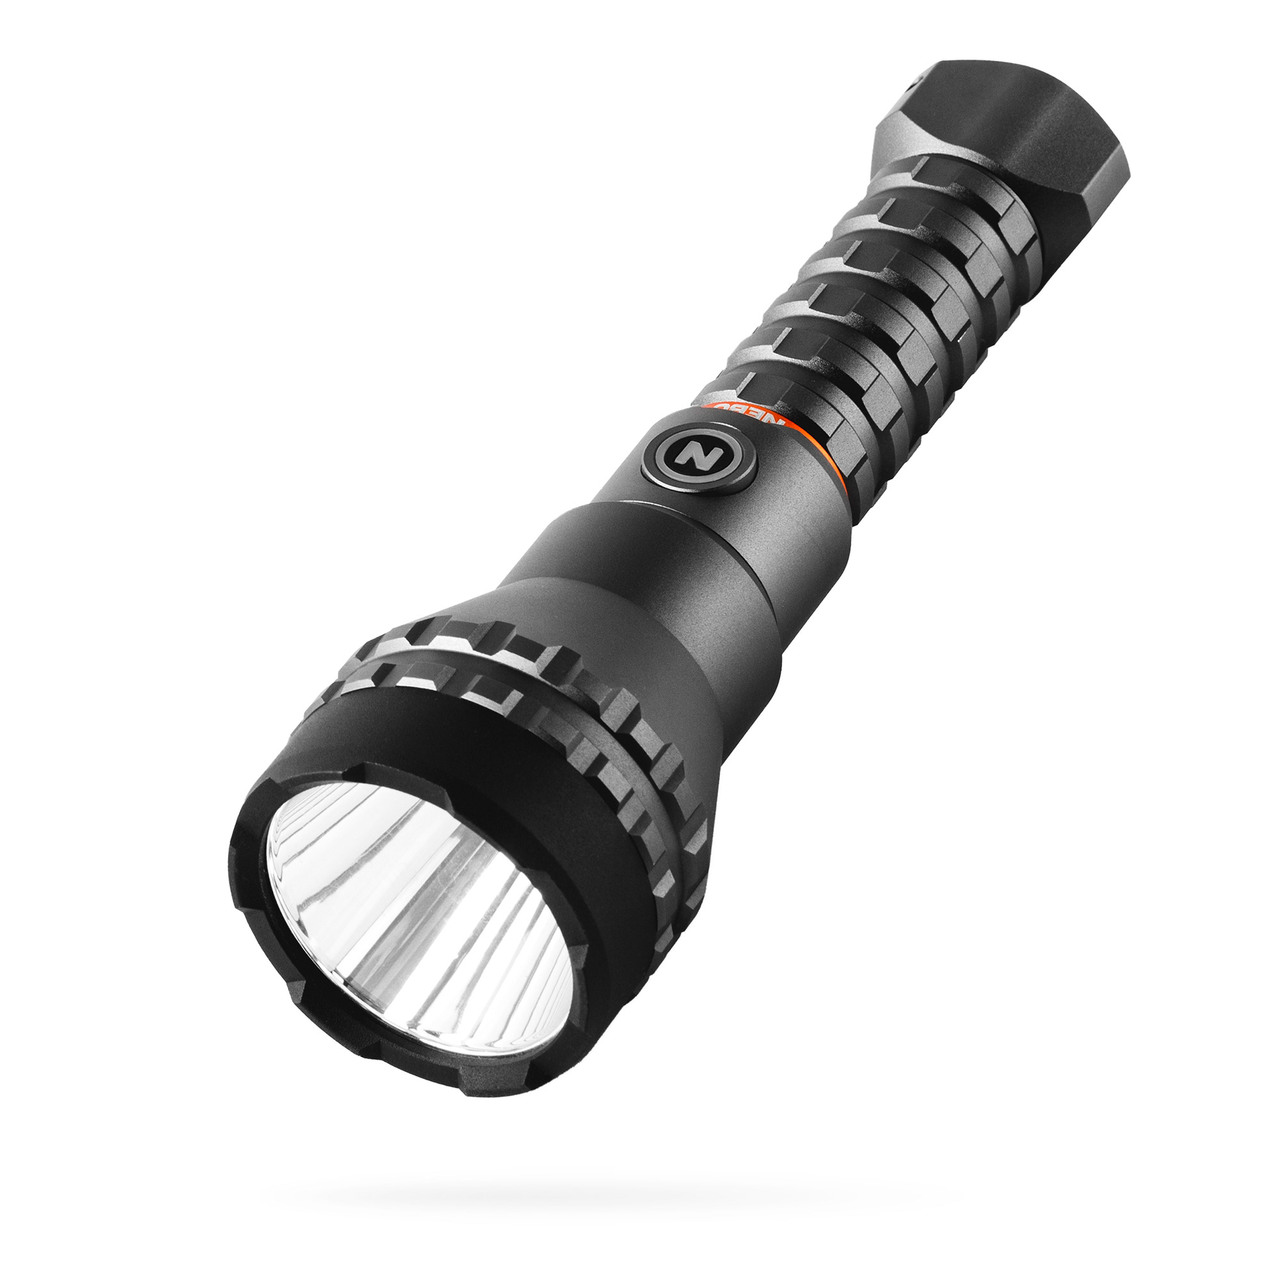 NEBO Luxtreme 900 Metres USB-C Rechargeable Searchlight